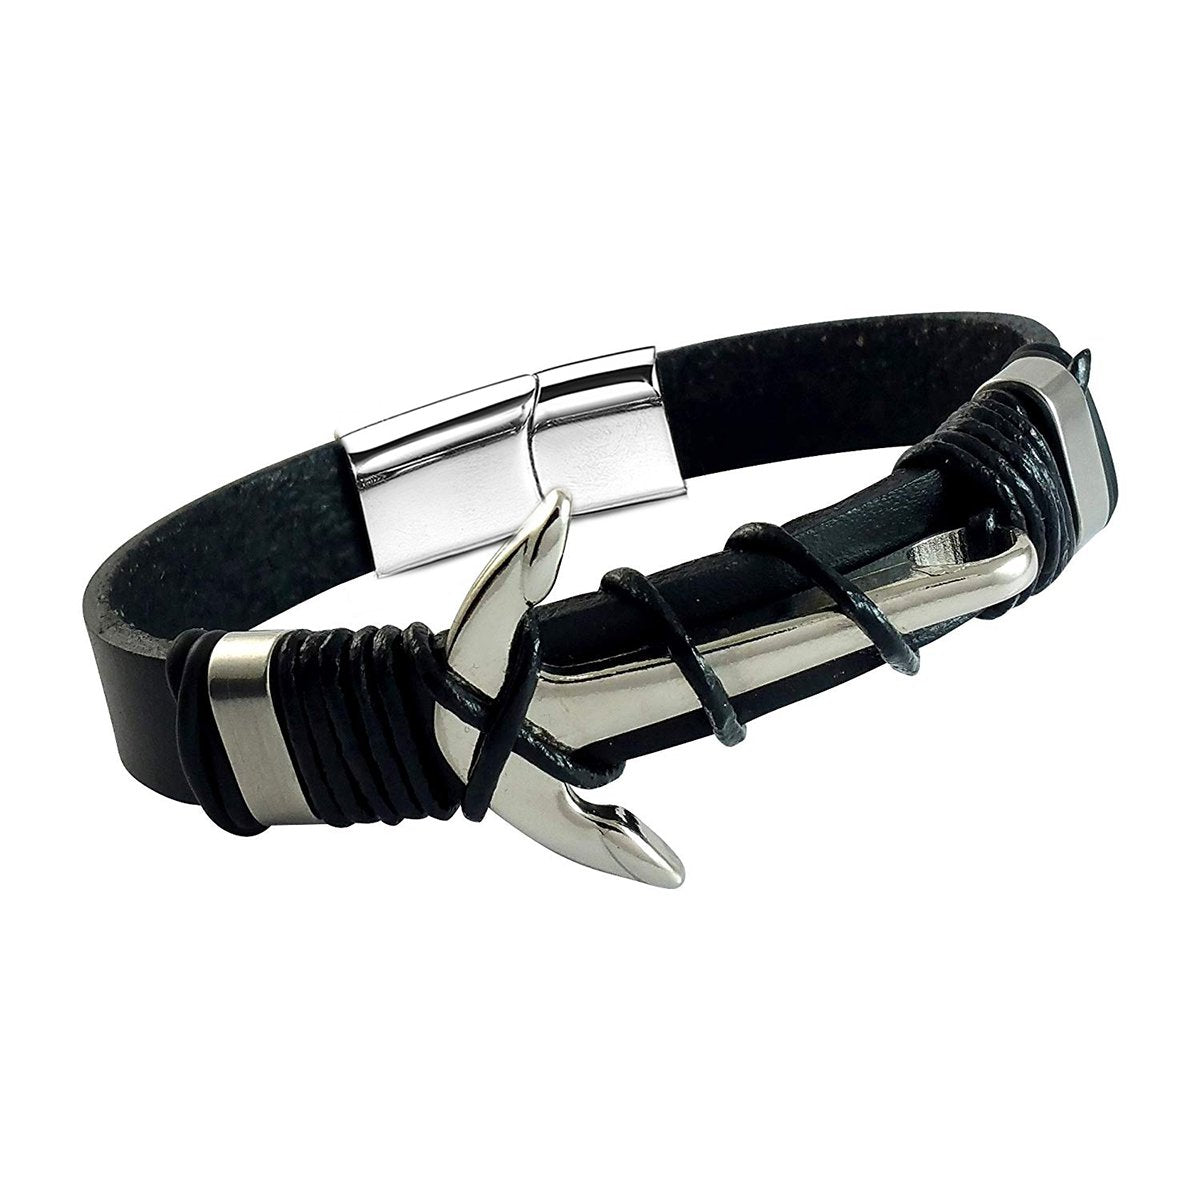 Silver Anchor Arrow Black Leather Stainless Steel Wrist Band Bracelet